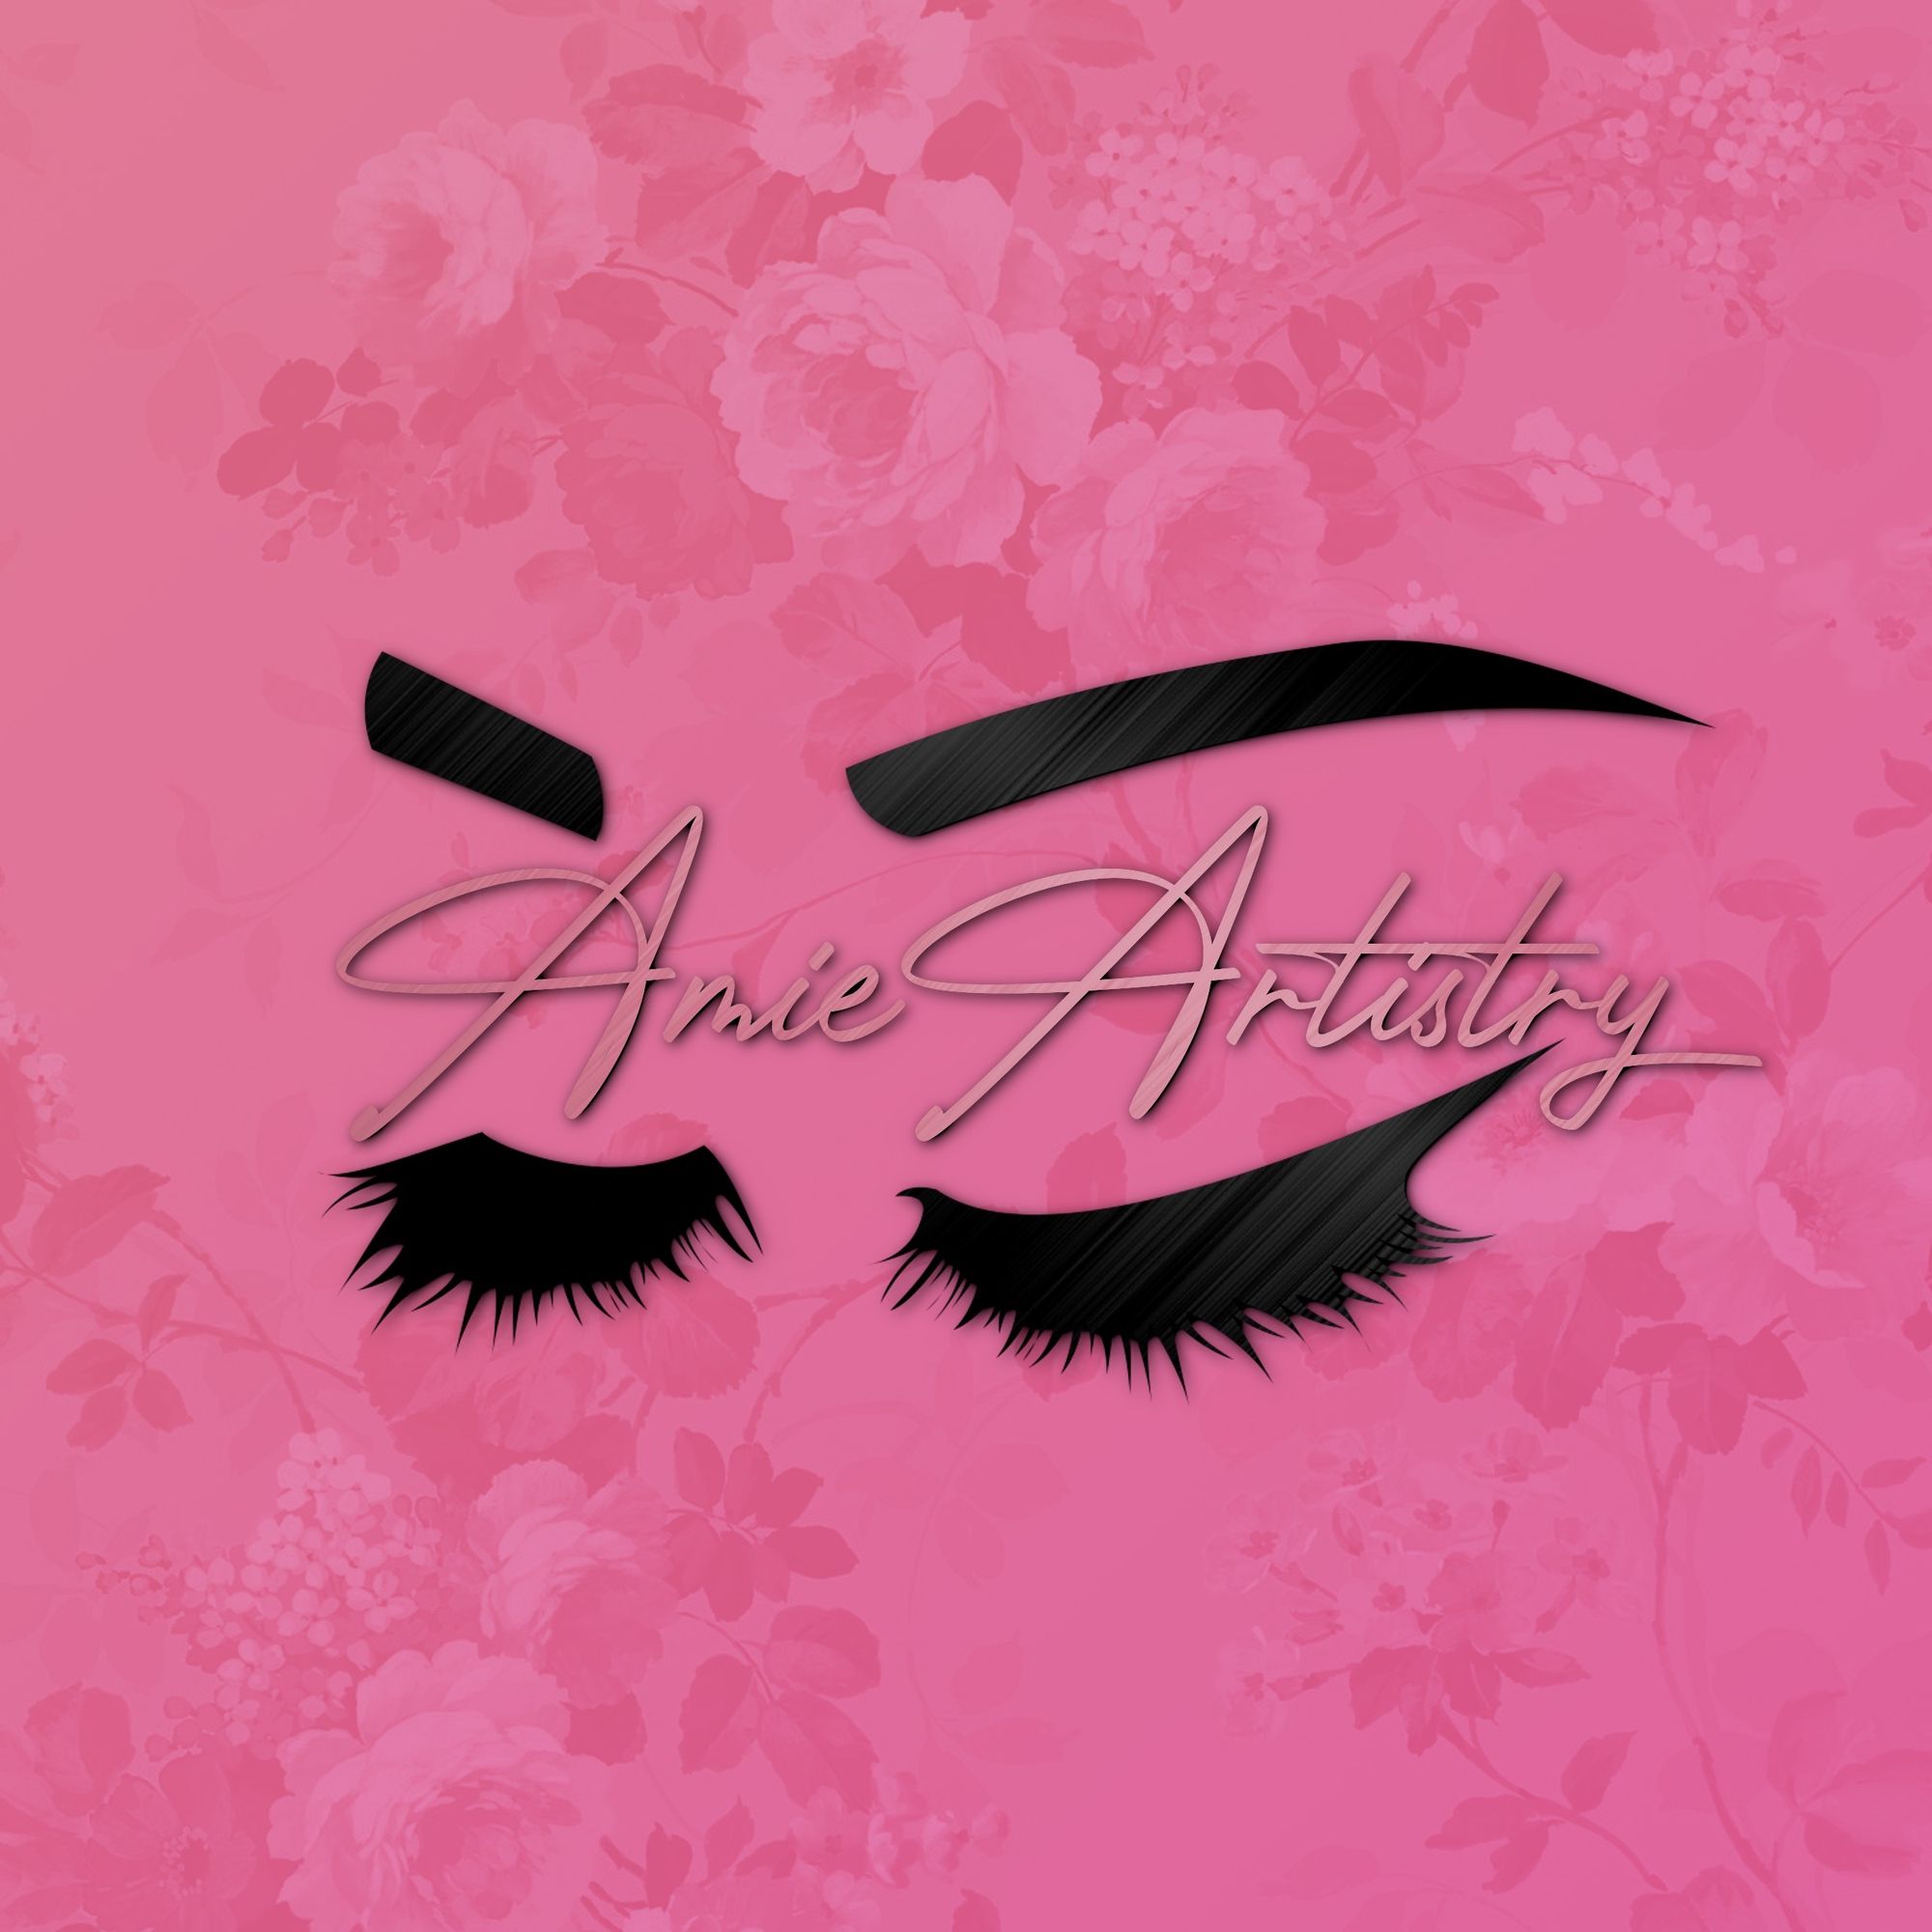 One-Stop Glam Shop - AmieArtistry